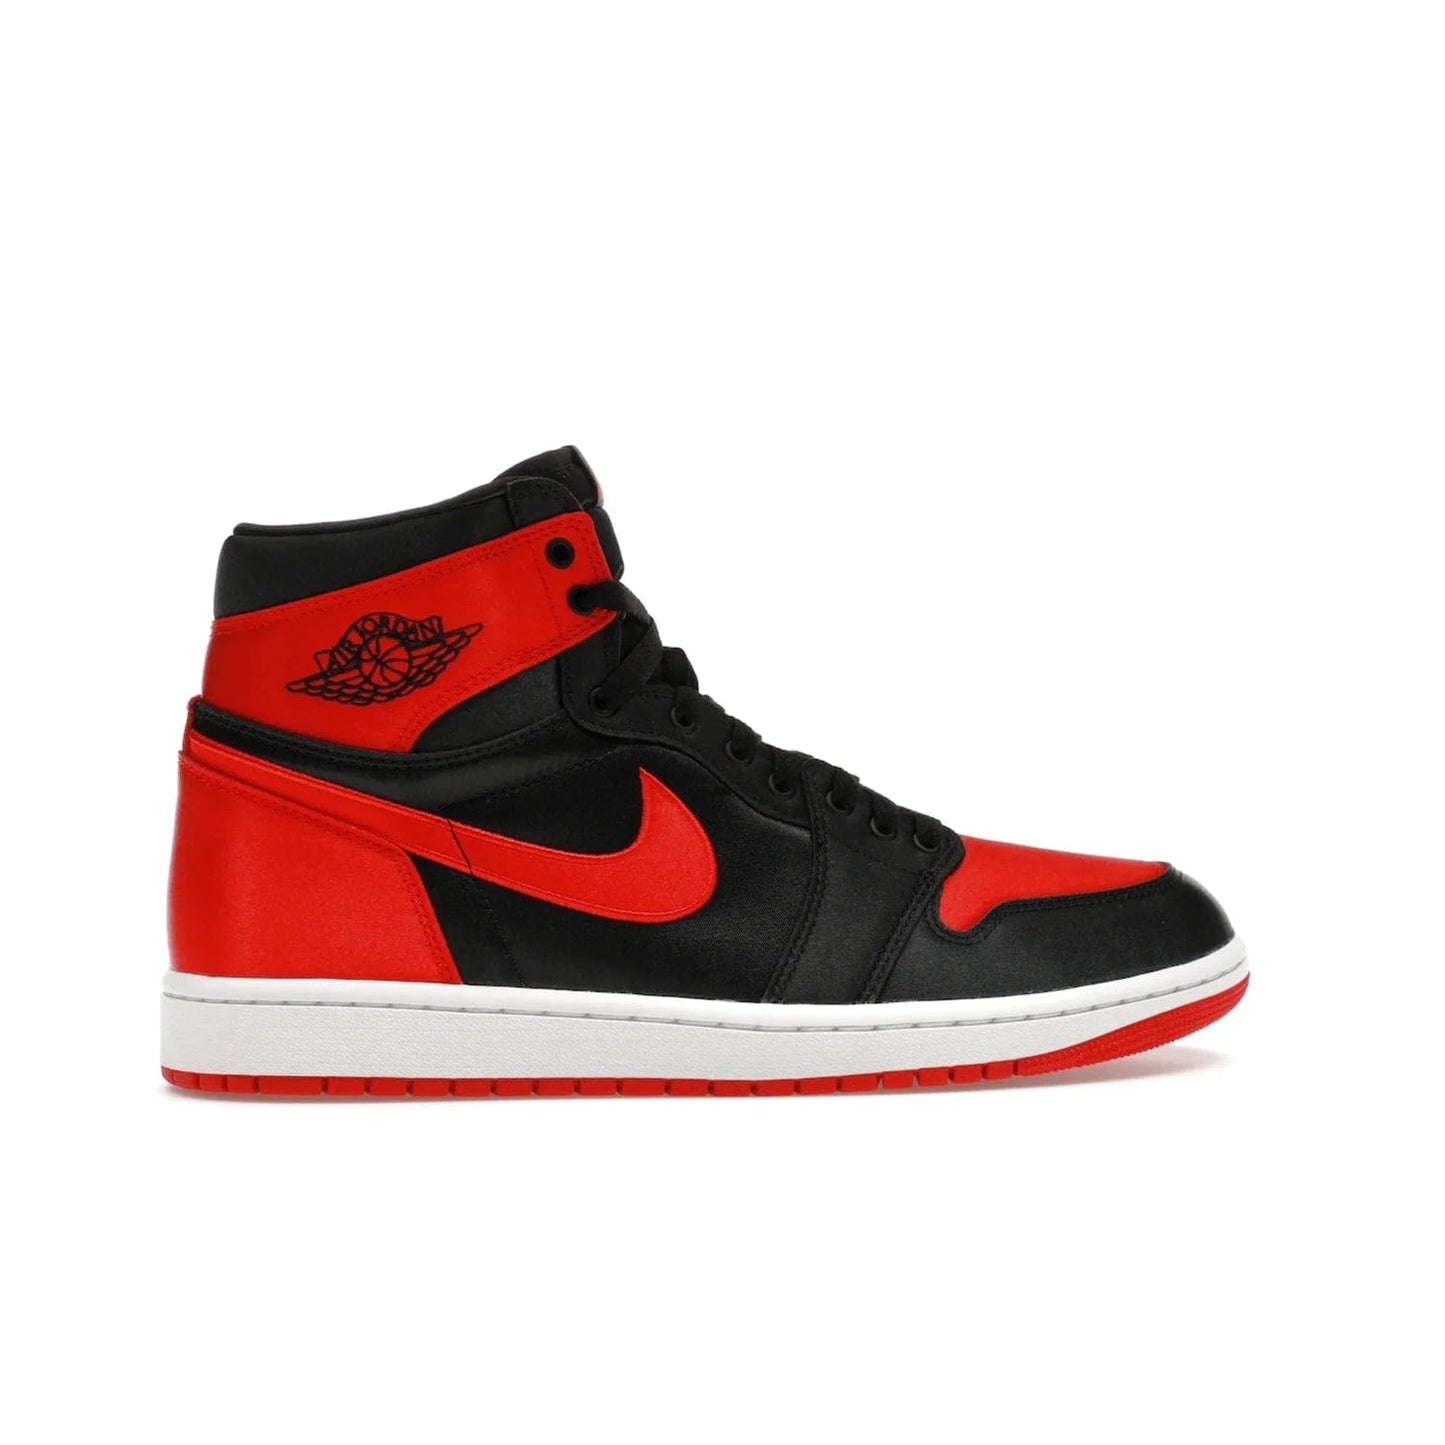 Jordan 1 Retro High OG Satin Bred (Women's) - Image 36 - Only at www.BallersClubKickz.com - Introducing the Jordan 1 Retro High OG Satin Bred (Women's). Luxe satin finish, contrasting hues & classic accents. Trending sneakers symbolizing timelessness & heritage. Make a bold statement with this iconic shoe. Available October 4, 2023.